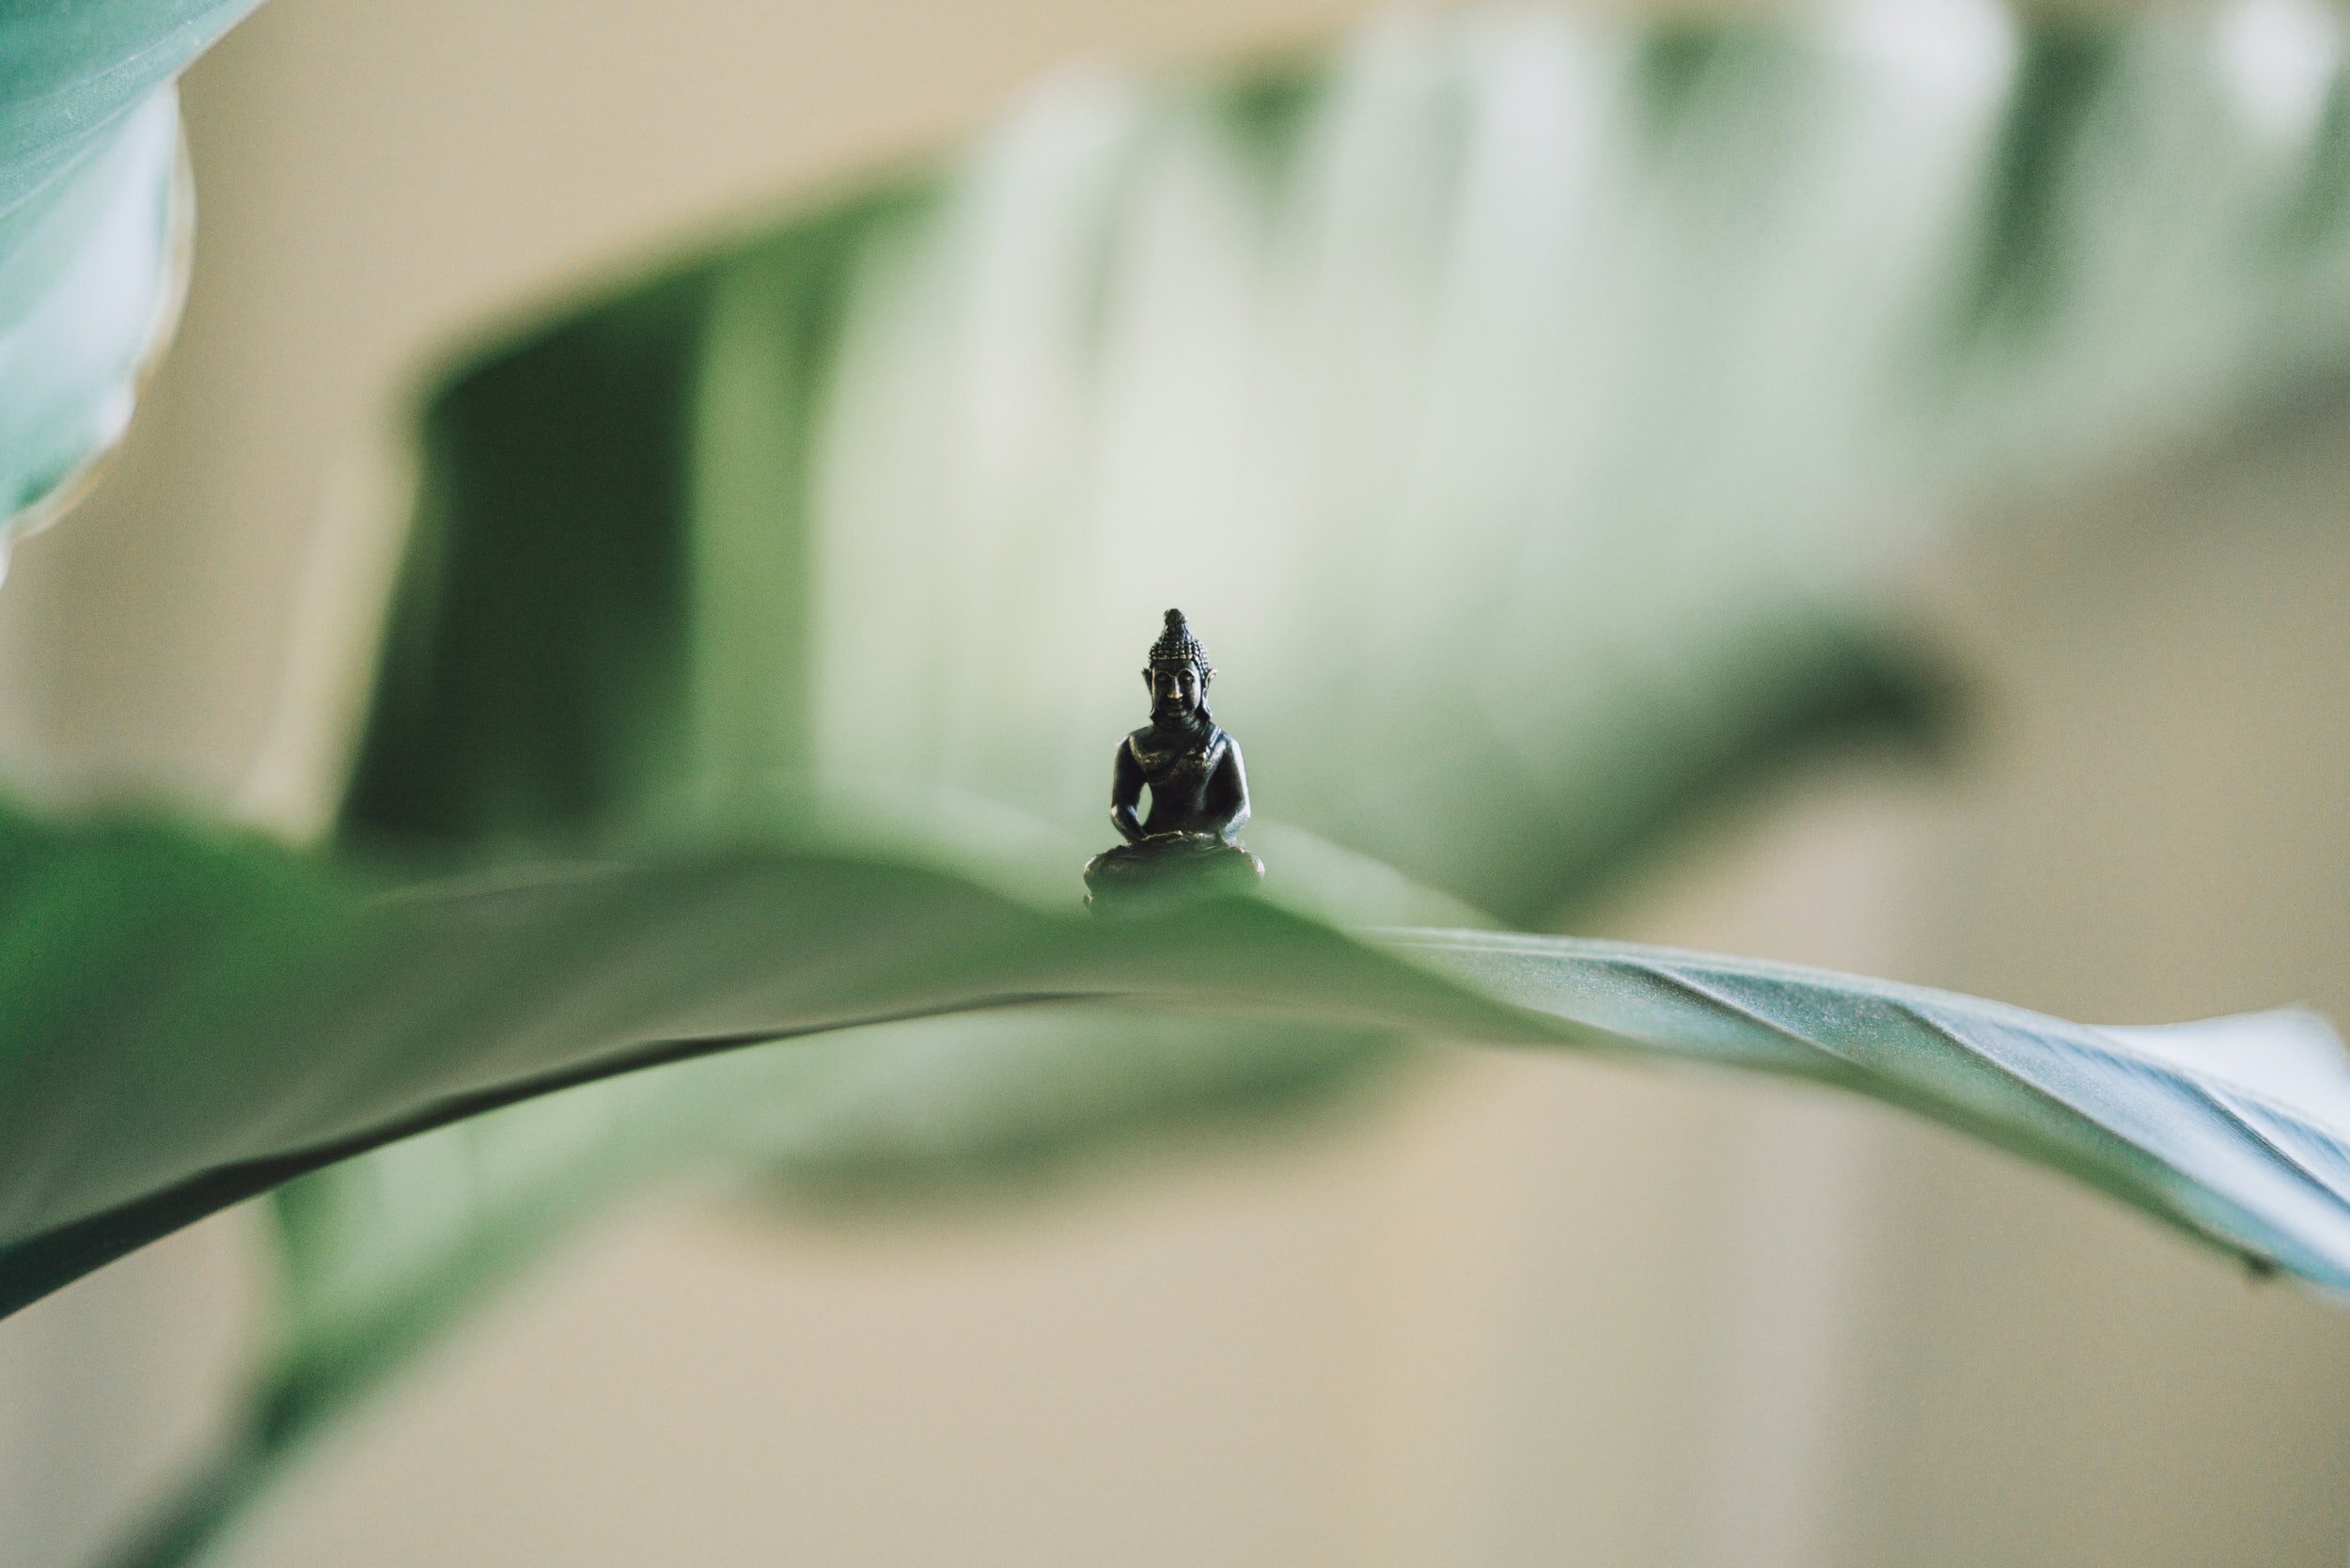 Here we see the tiny Buddha Frog in its natural habitat…